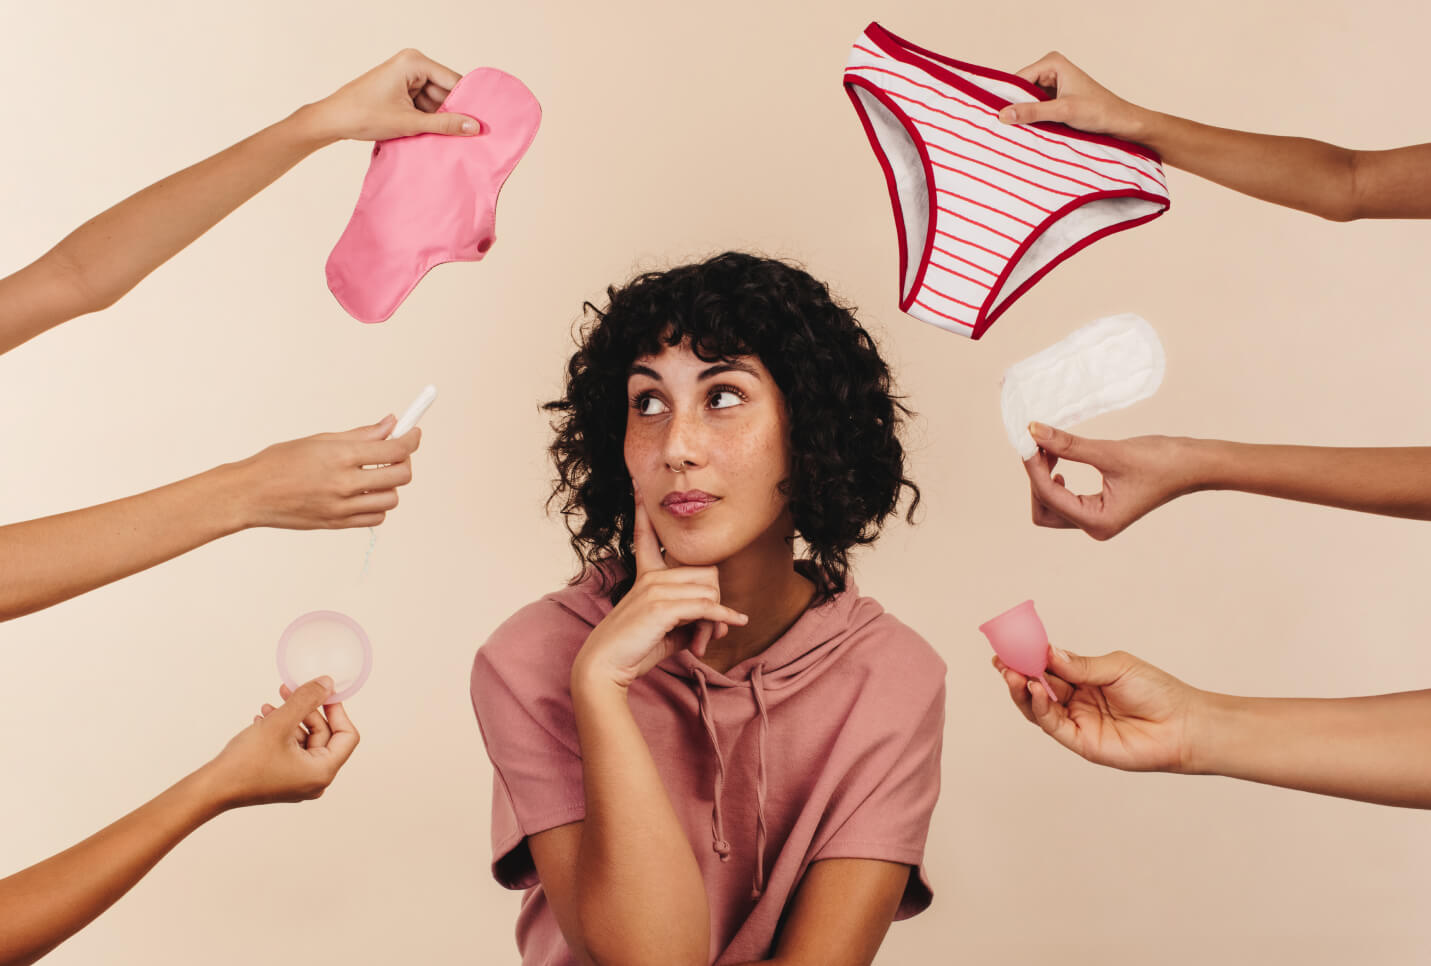 What are the potential causes and health implications of experiencing daily brown  stains, wetness, and odor in female underwear? - Poe